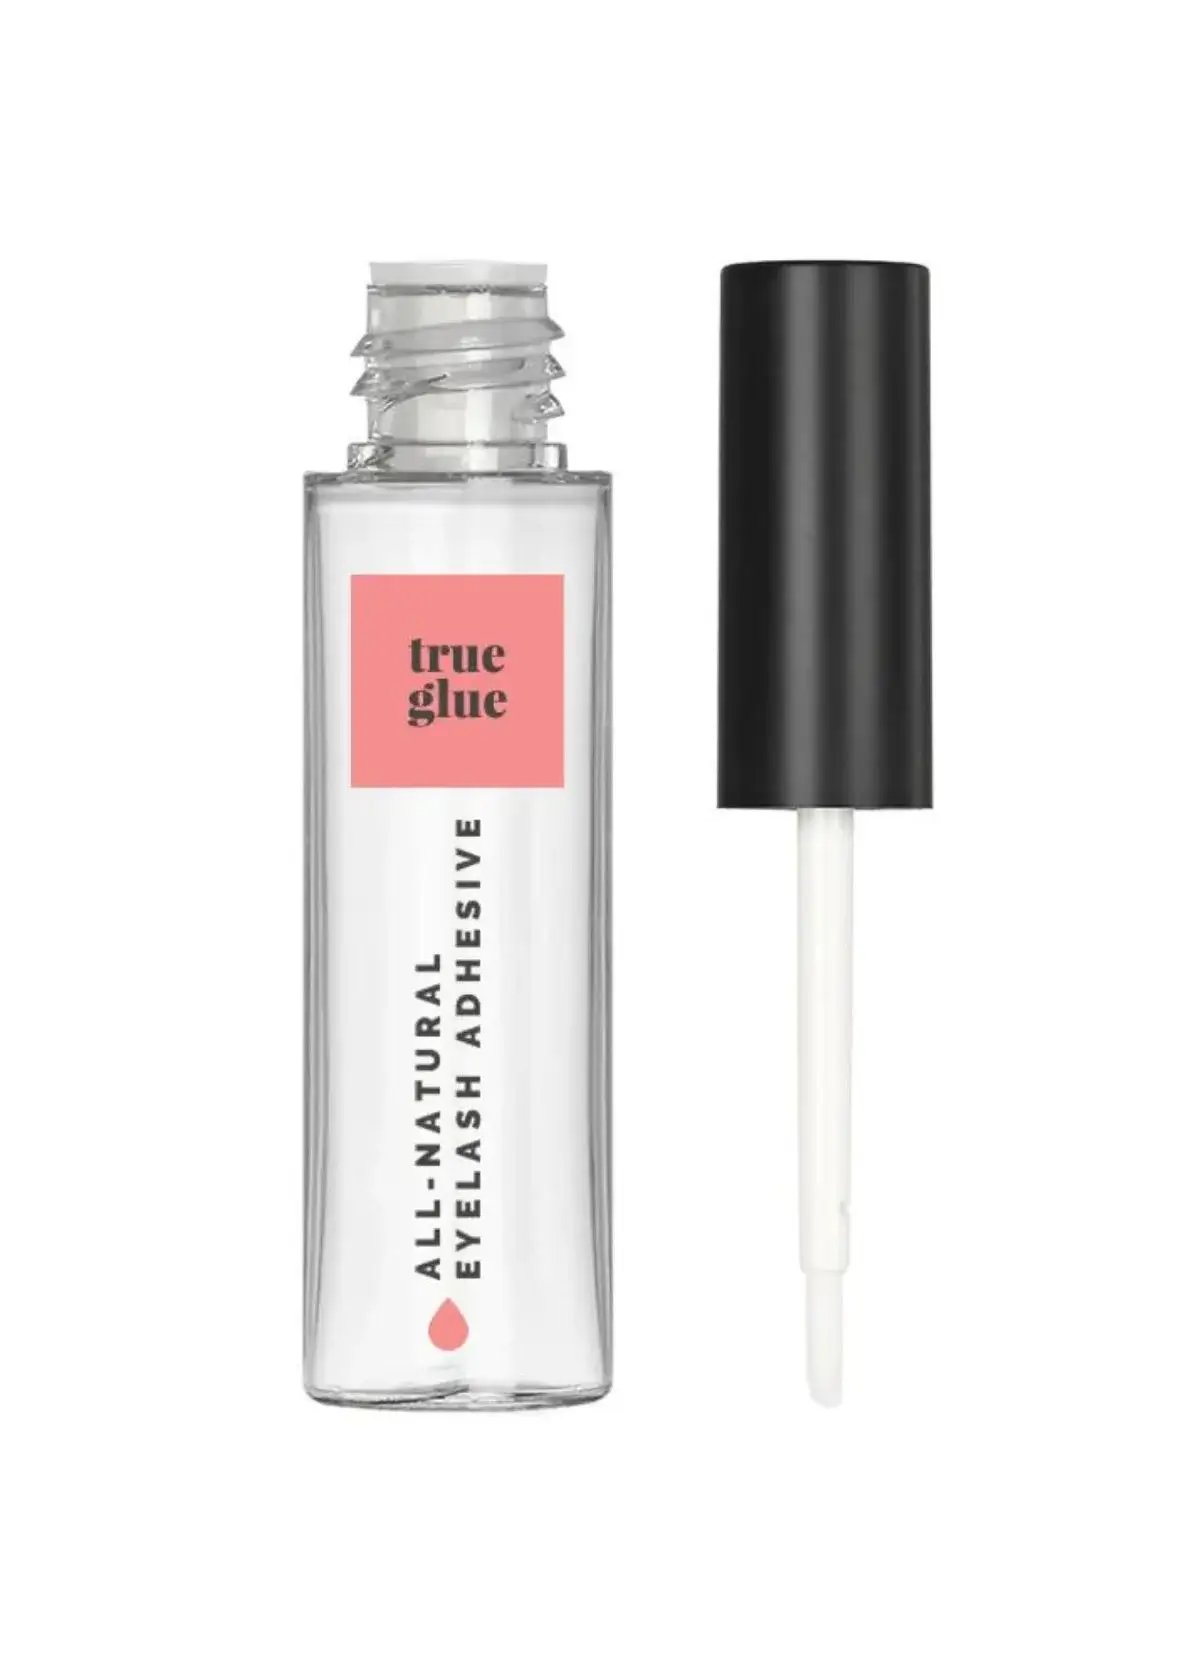 How to choose the right eyelash glue for sensitive eyes?